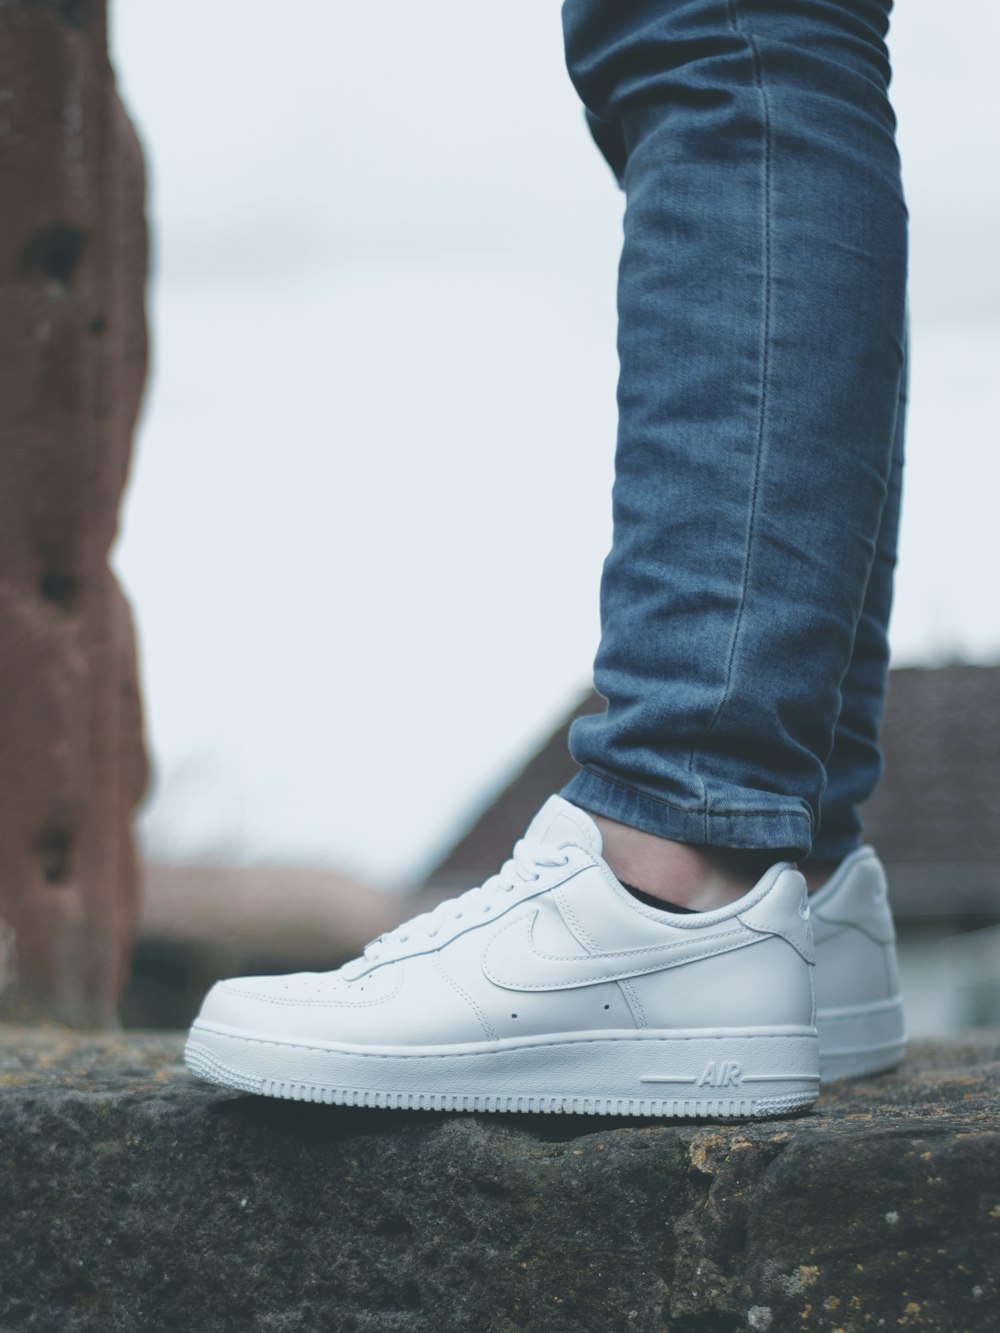 Air Force 1 Pictures | Download Free Images on Unsplash